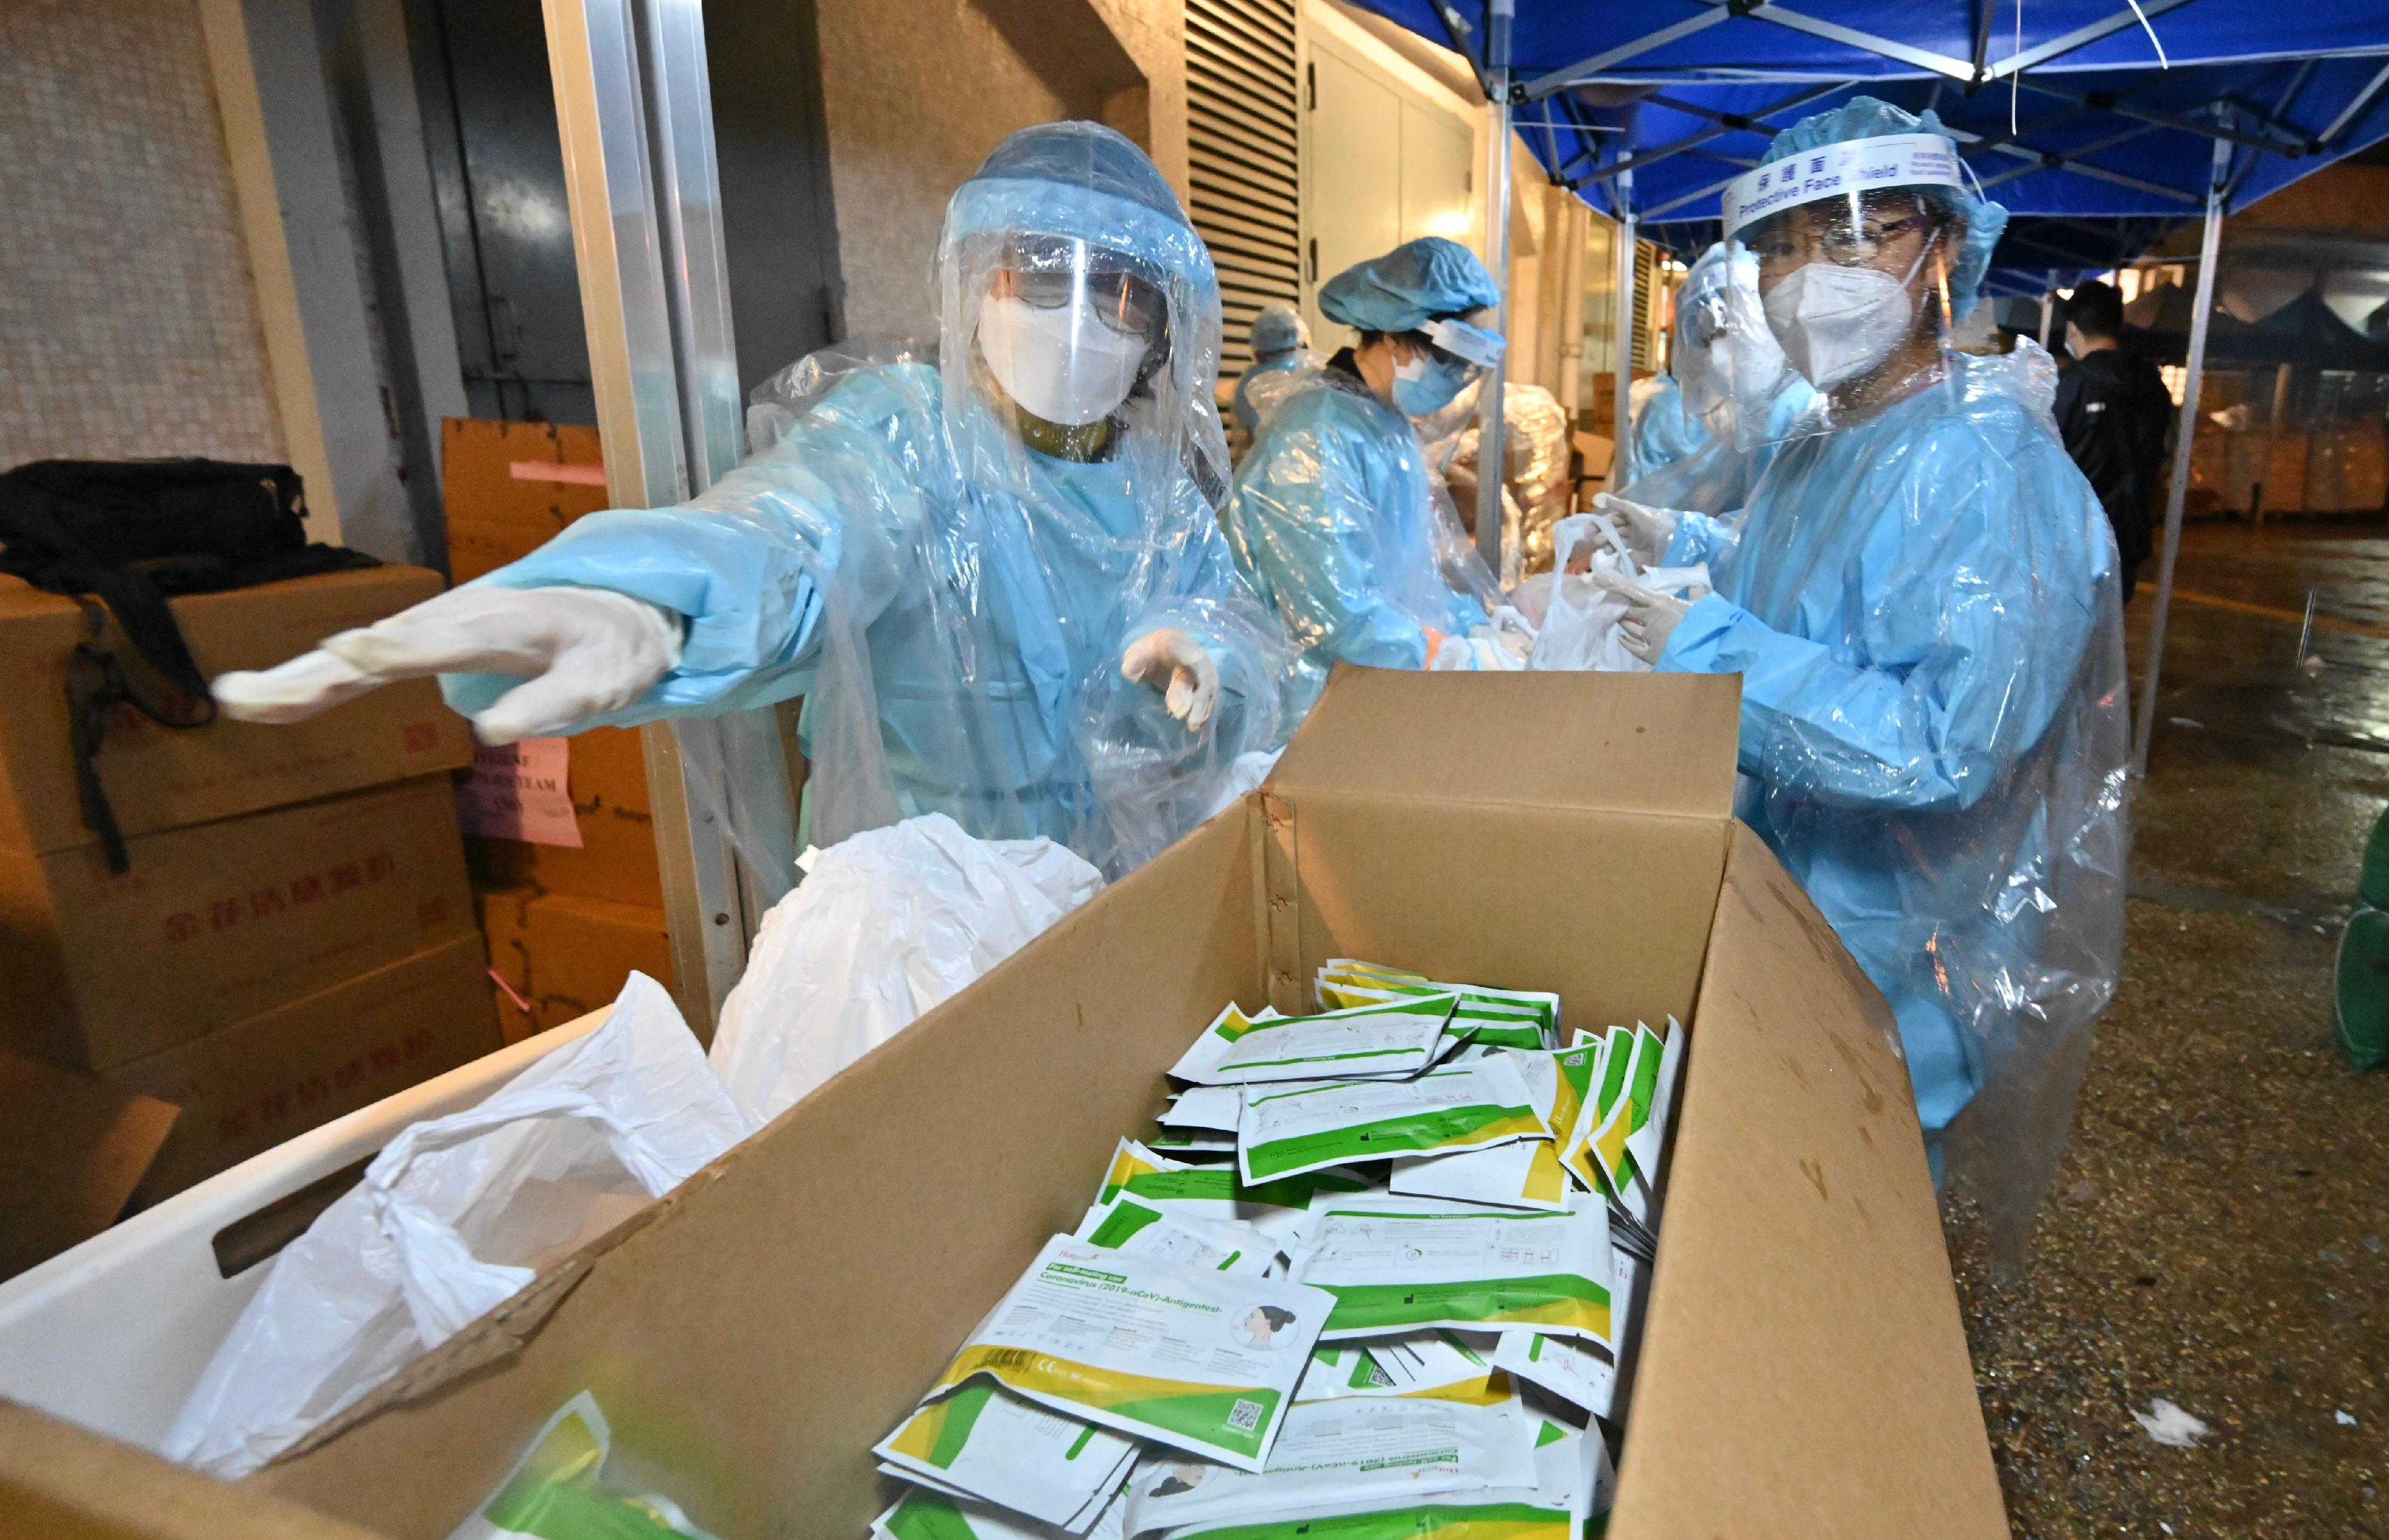 The Labour and Welfare Bureau today (March 24) completed a "restriction-testing declaration" operation in the specified "restricted area" of Wong Tai Sin. Photo shows the Permanent Secretary for Labour and Welfare, Ms Alice Lau (right), joining colleagues yesterday evening (March 23) in preparing anti-epidemic supplies, including rapid test kits, for residents subject to compulsory testing.